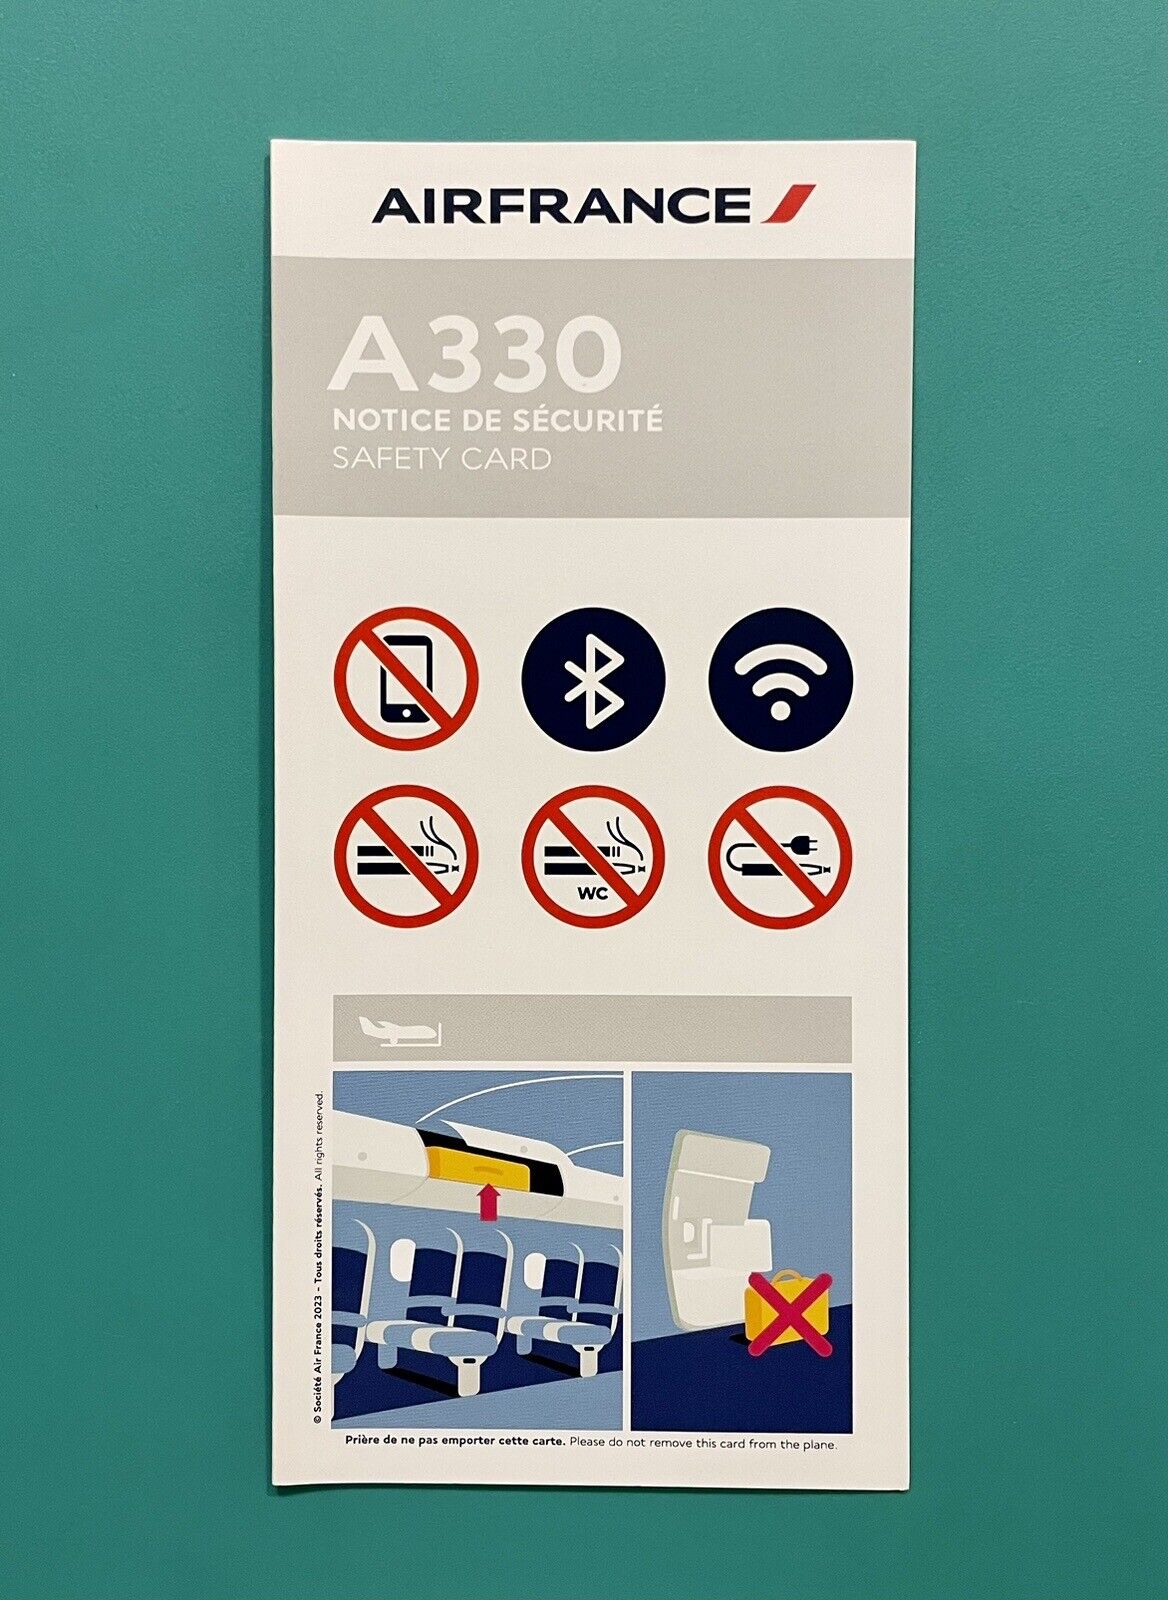 2023 AIR FRANCE SAFETY CARD — AIRBUS 330